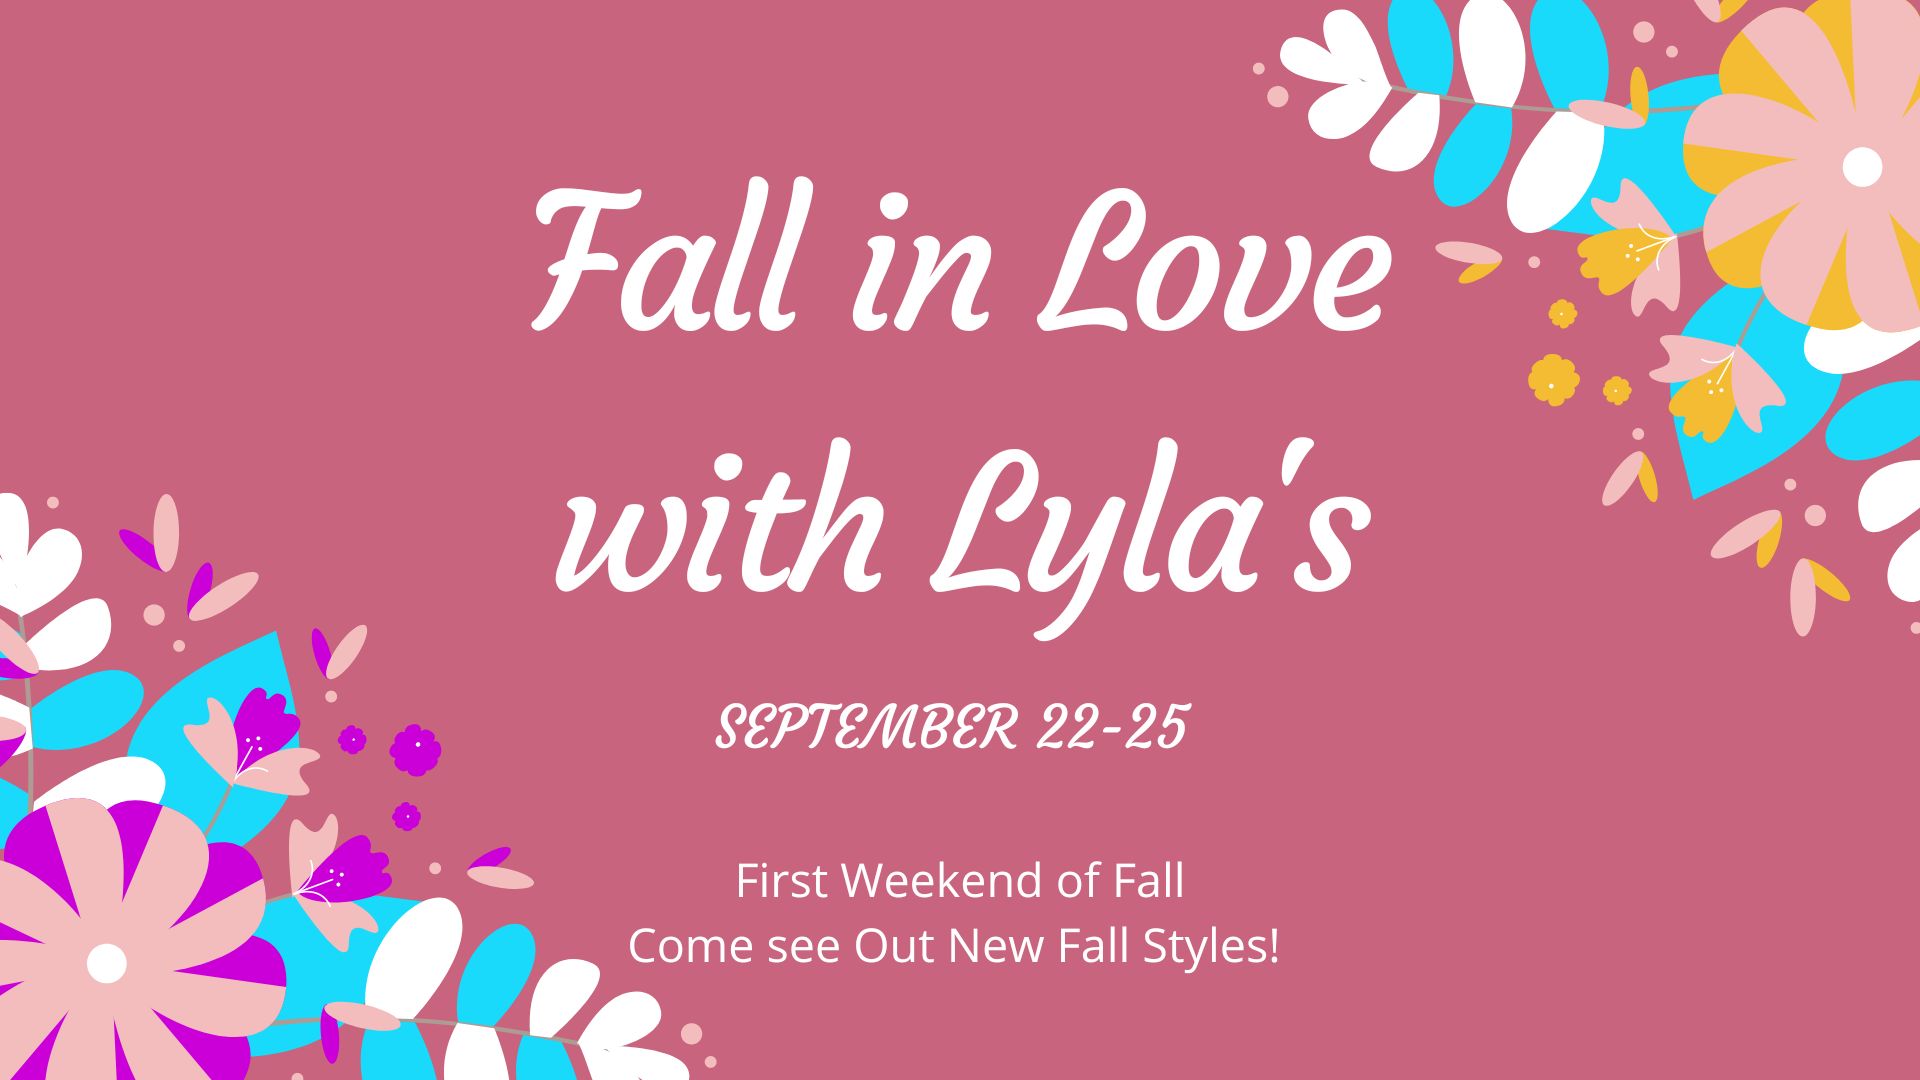 Fall in Love with Lylas